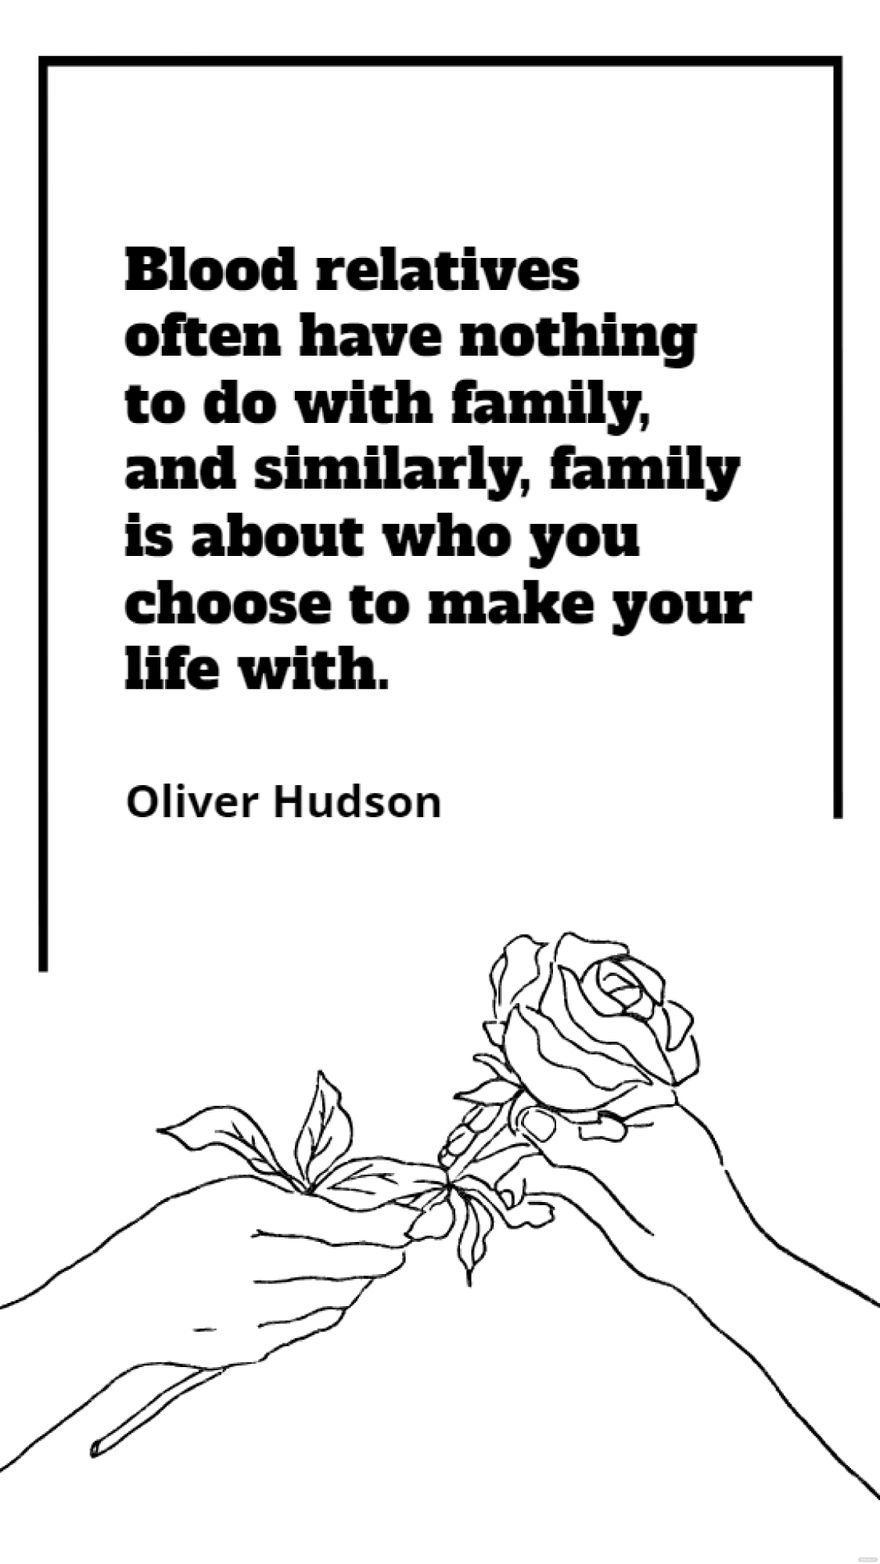 Oliver Hudson  Blood relatives often have nothing to do with family and similarly family is about who you choose to make your life with